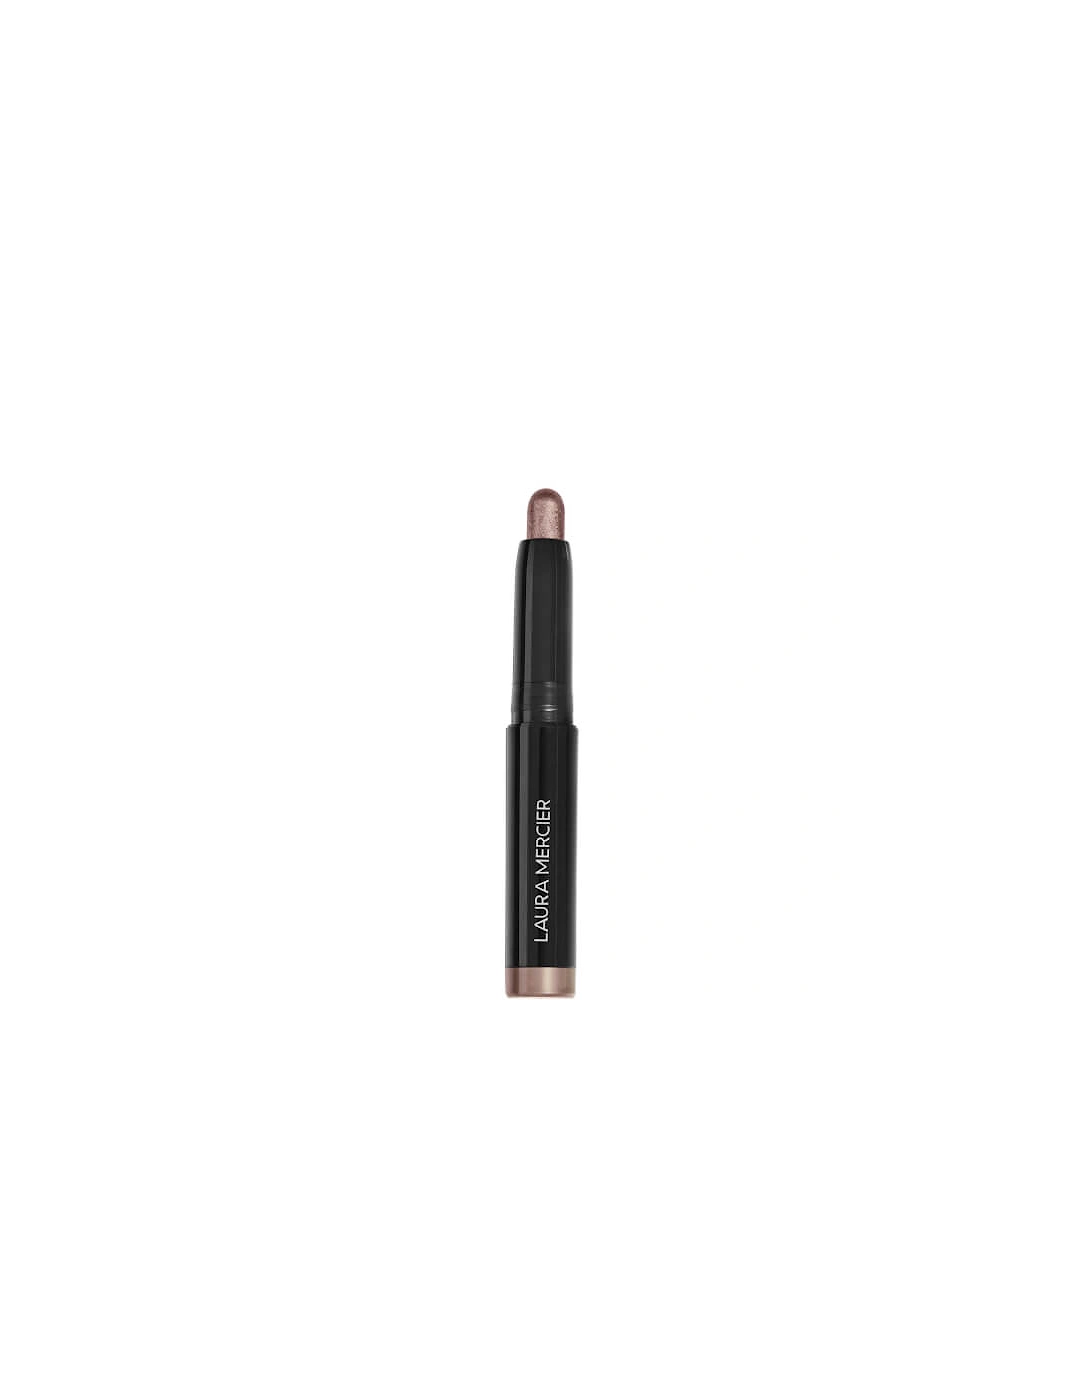 Caviar Stick Eye Colour Travel Size Exclusive - Amythest, 2 of 1